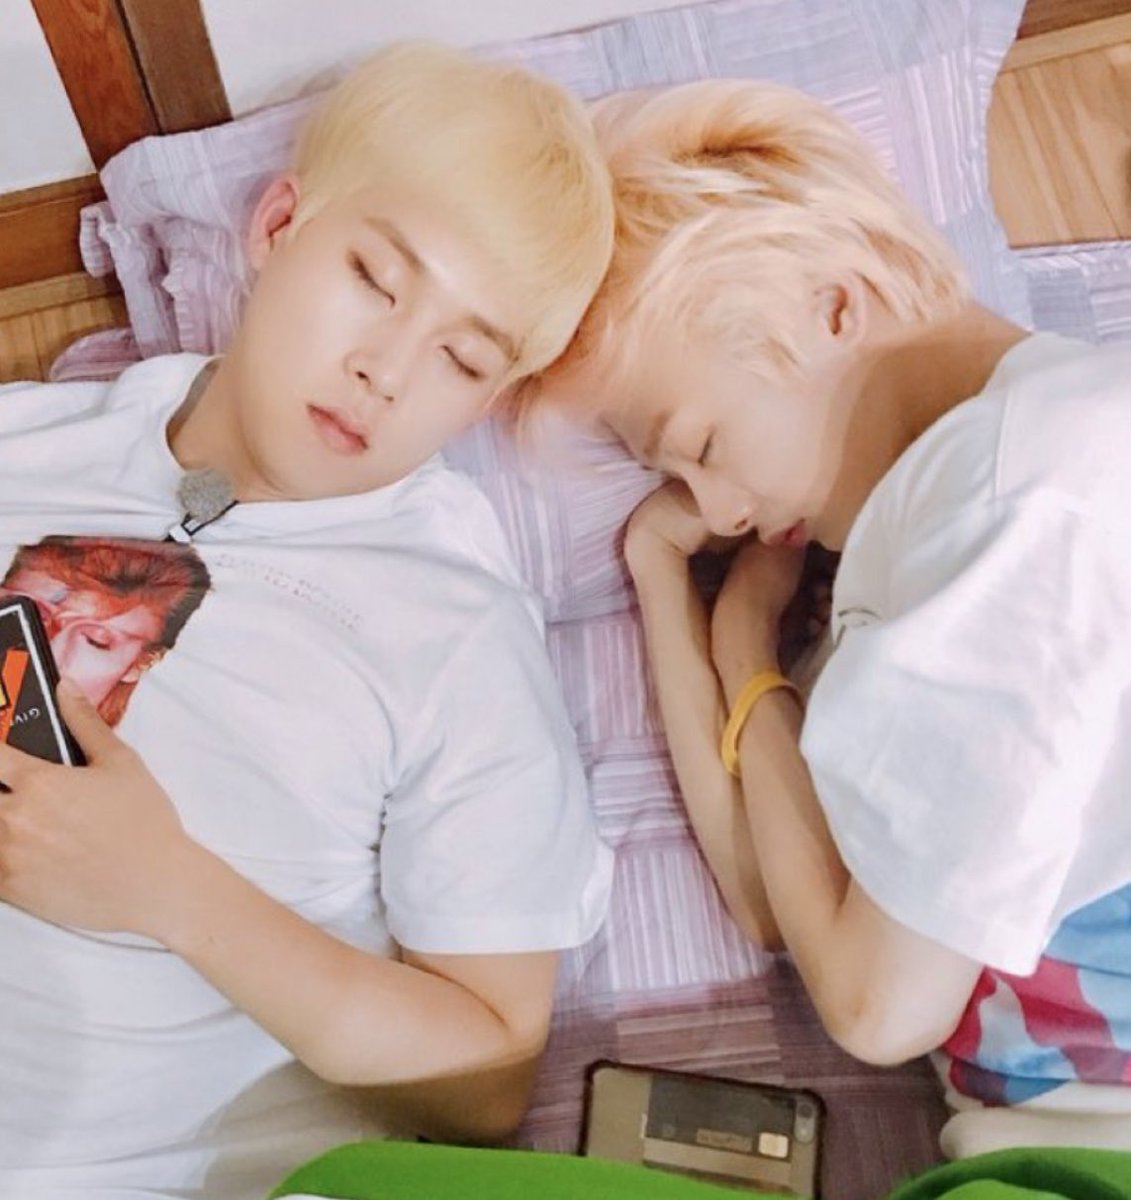 hyungheon- sleeping bundies - always looking at eachother so lovlingly i cry- ‘he has a strong mindset and he gives a lot of good advice. i fely on him and trust him’ jh